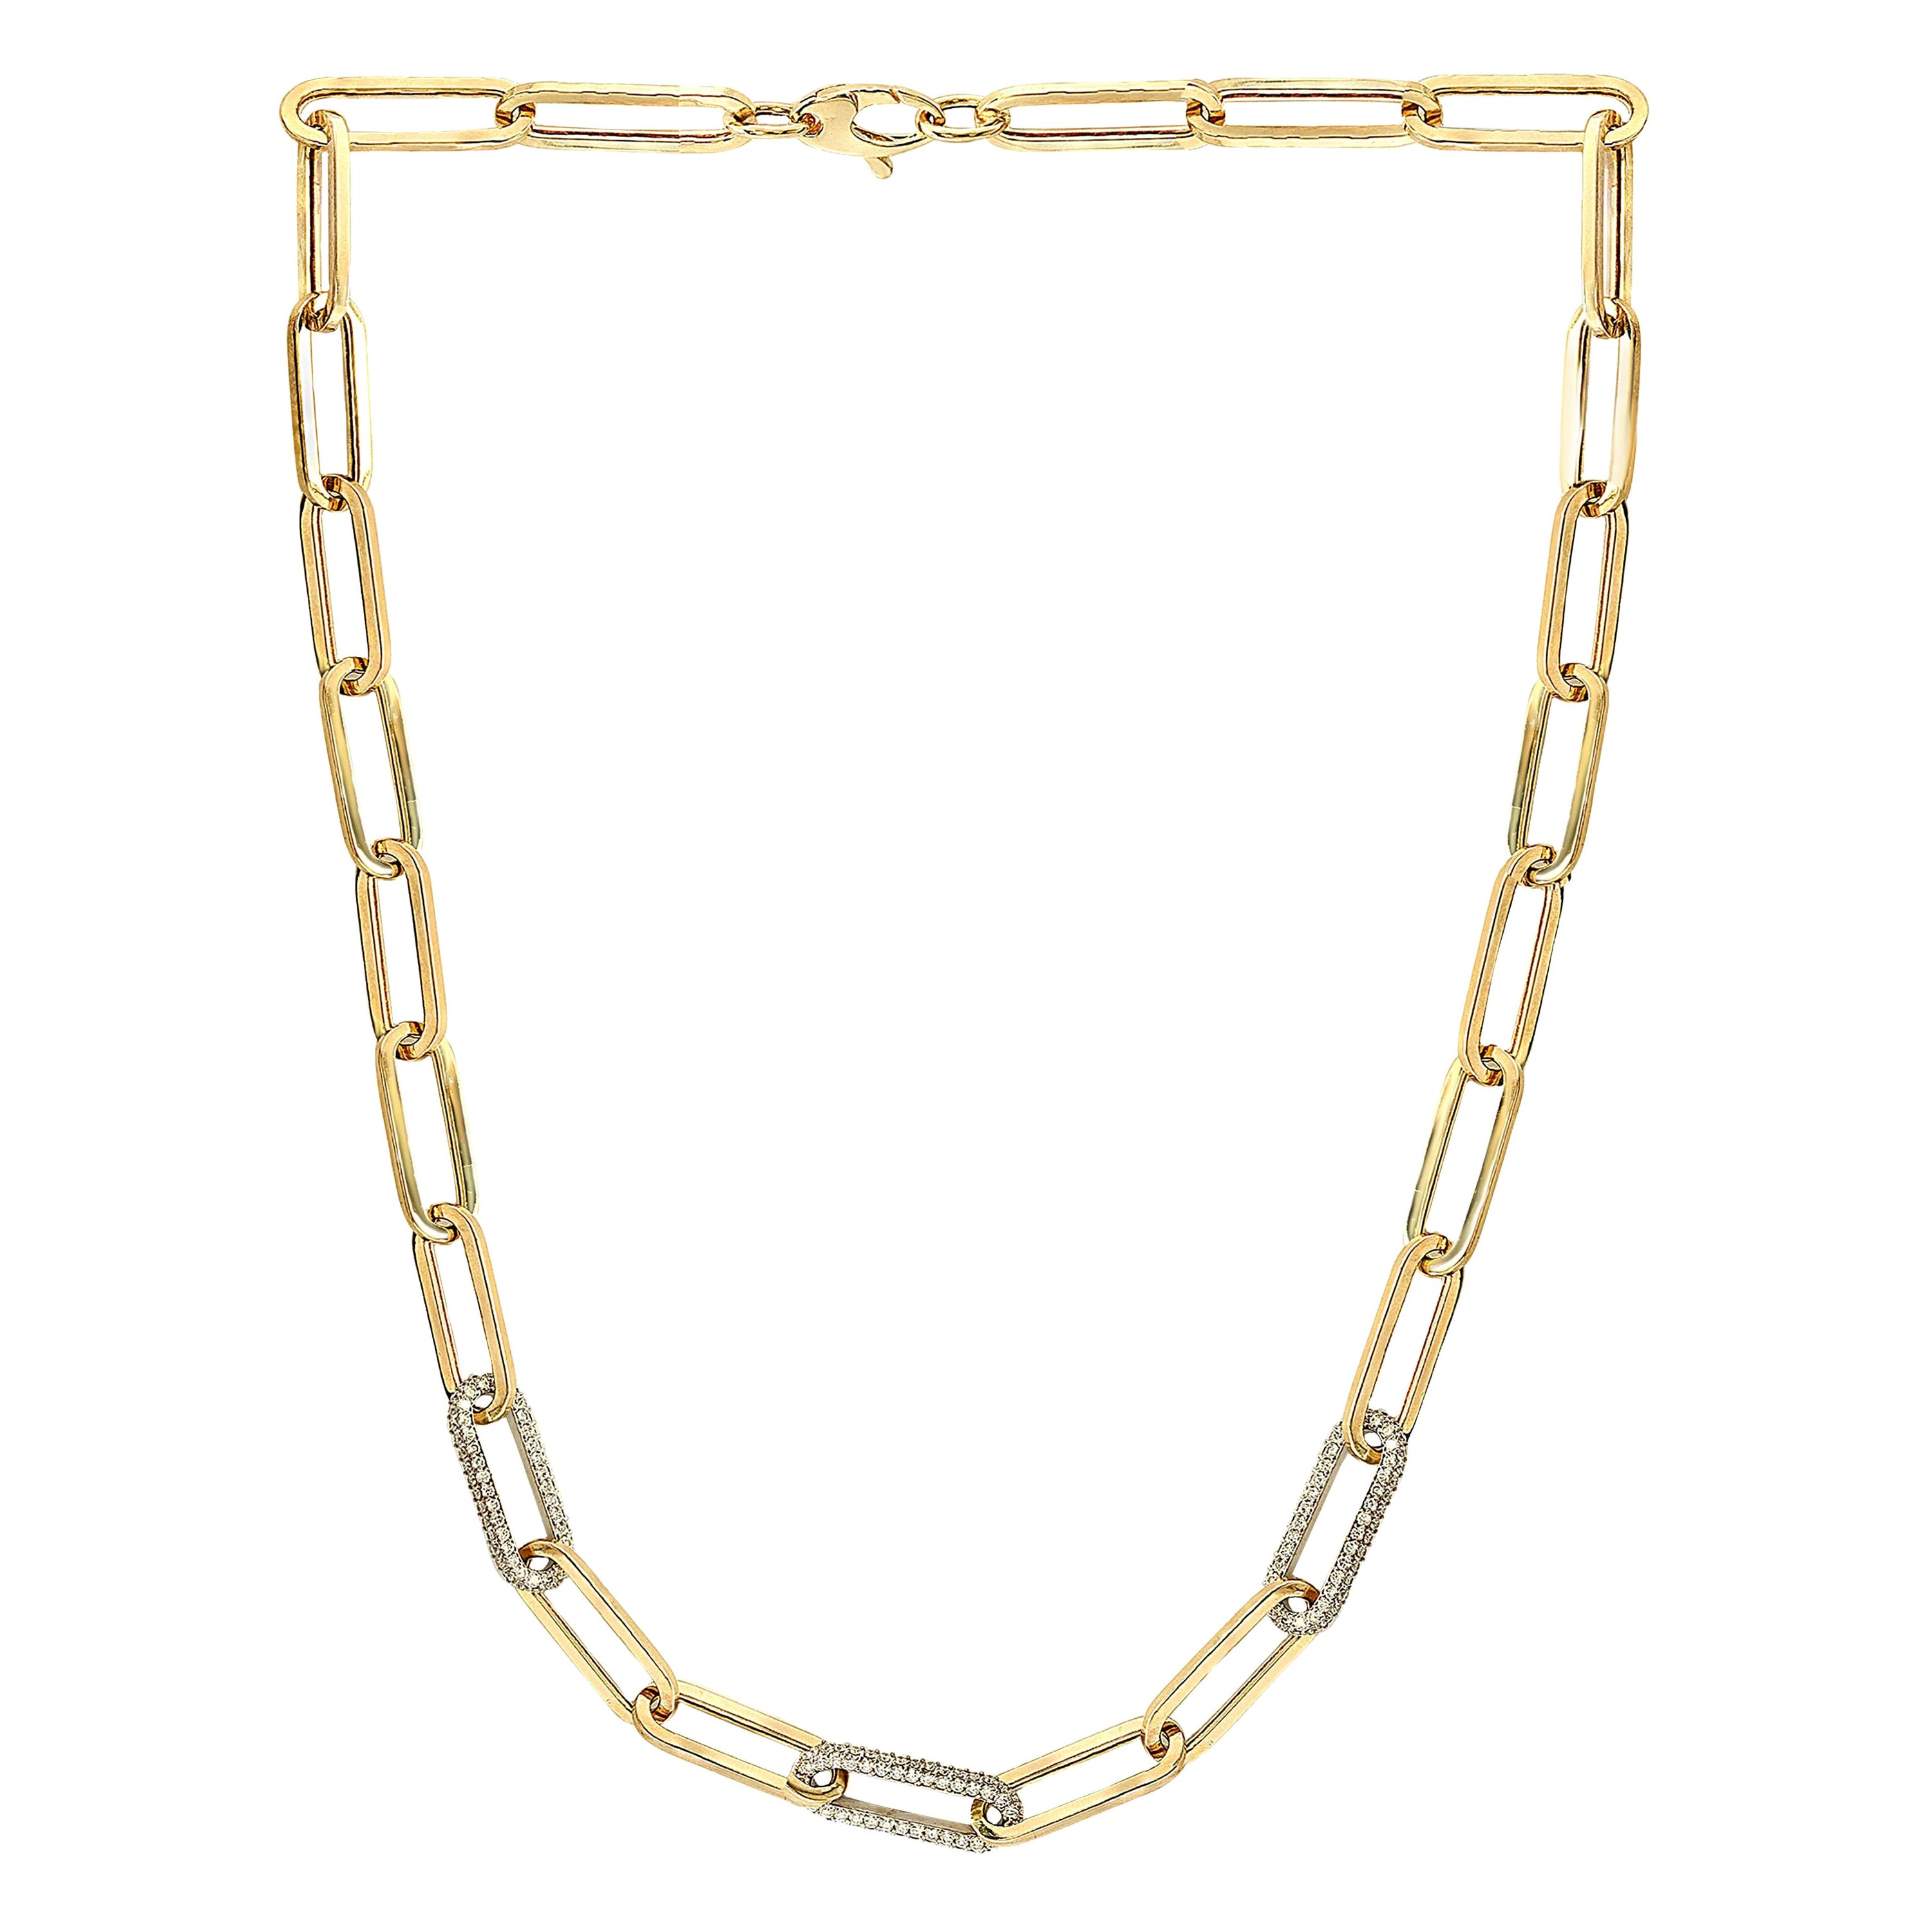 Grandeur 2.64 Carat Paper Clip Diamond Necklace in 14K Yellow and White Gold